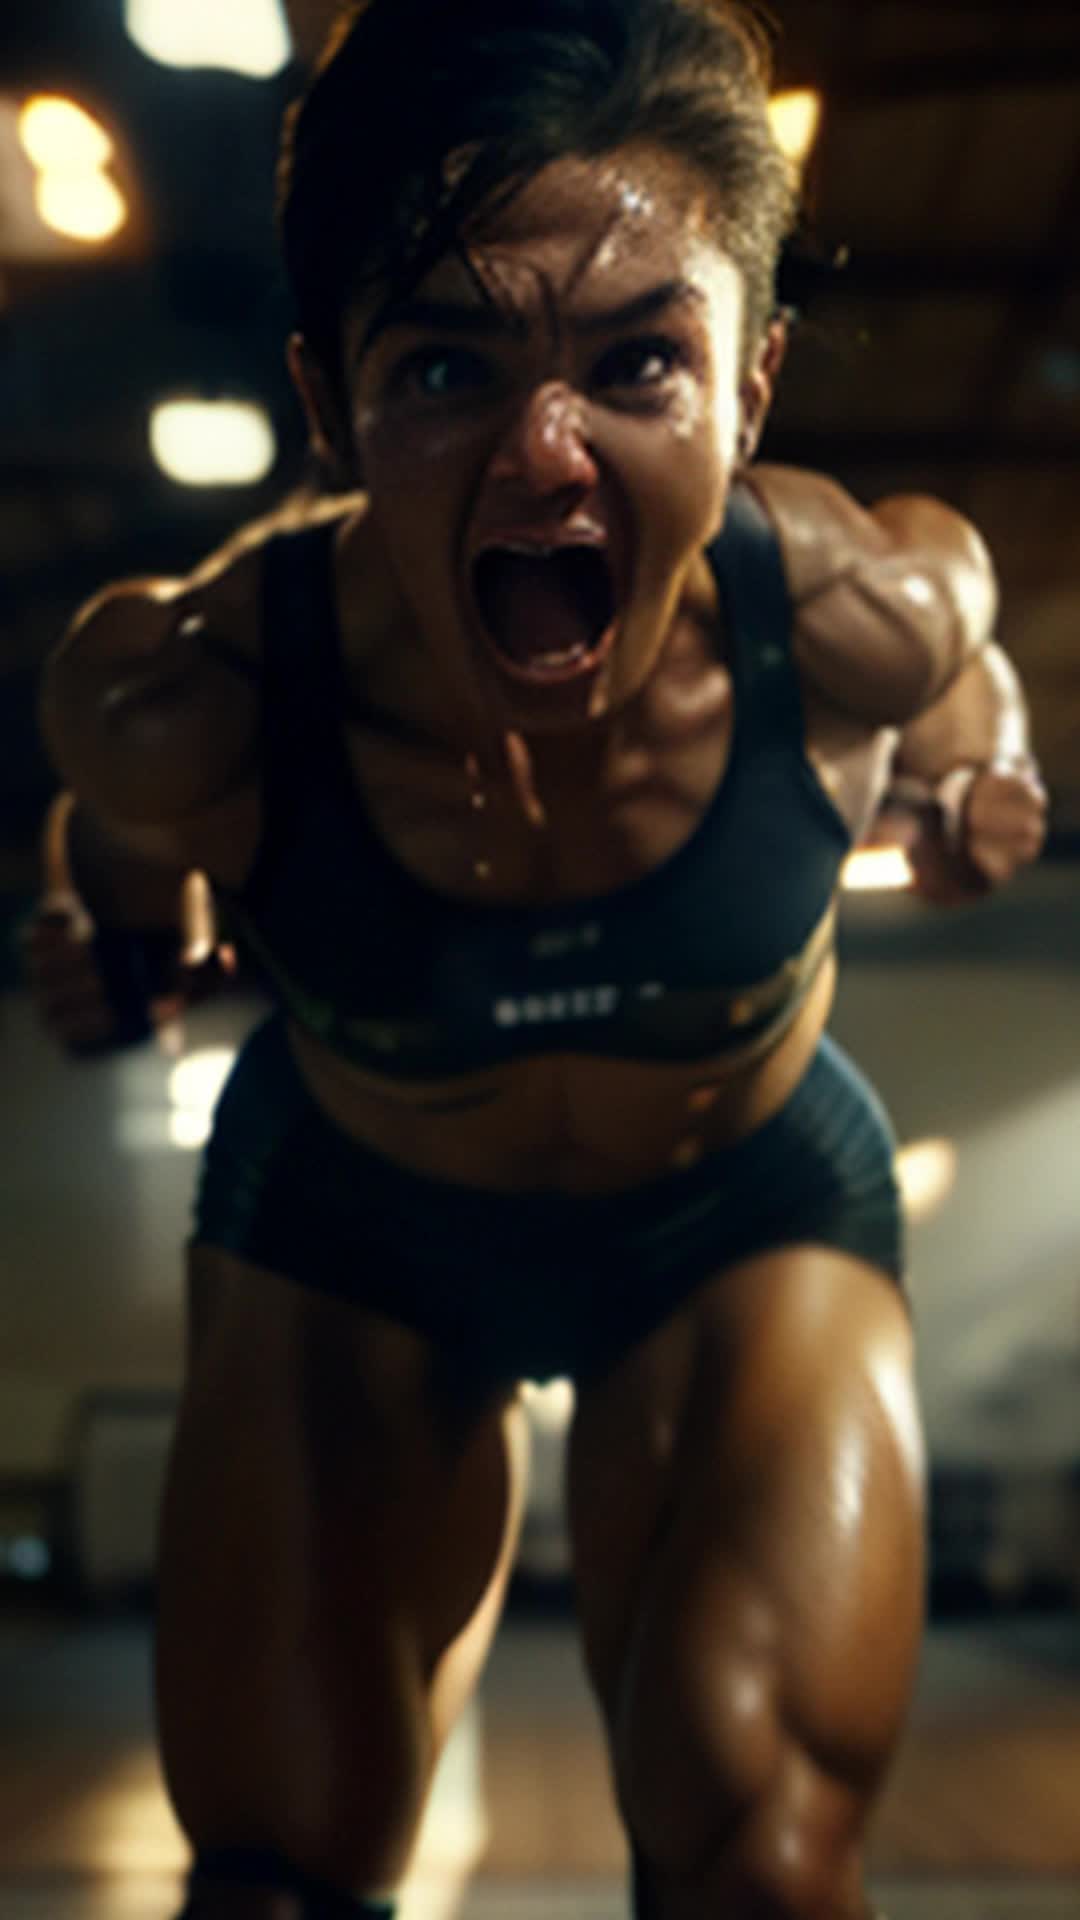 Triumphant athlete, surpassing personal best, gym setting, face glowing with sweat and victory, rebirth of competitive spirit visible, old gym equipment, warm lighting, expression of intense focus and joy